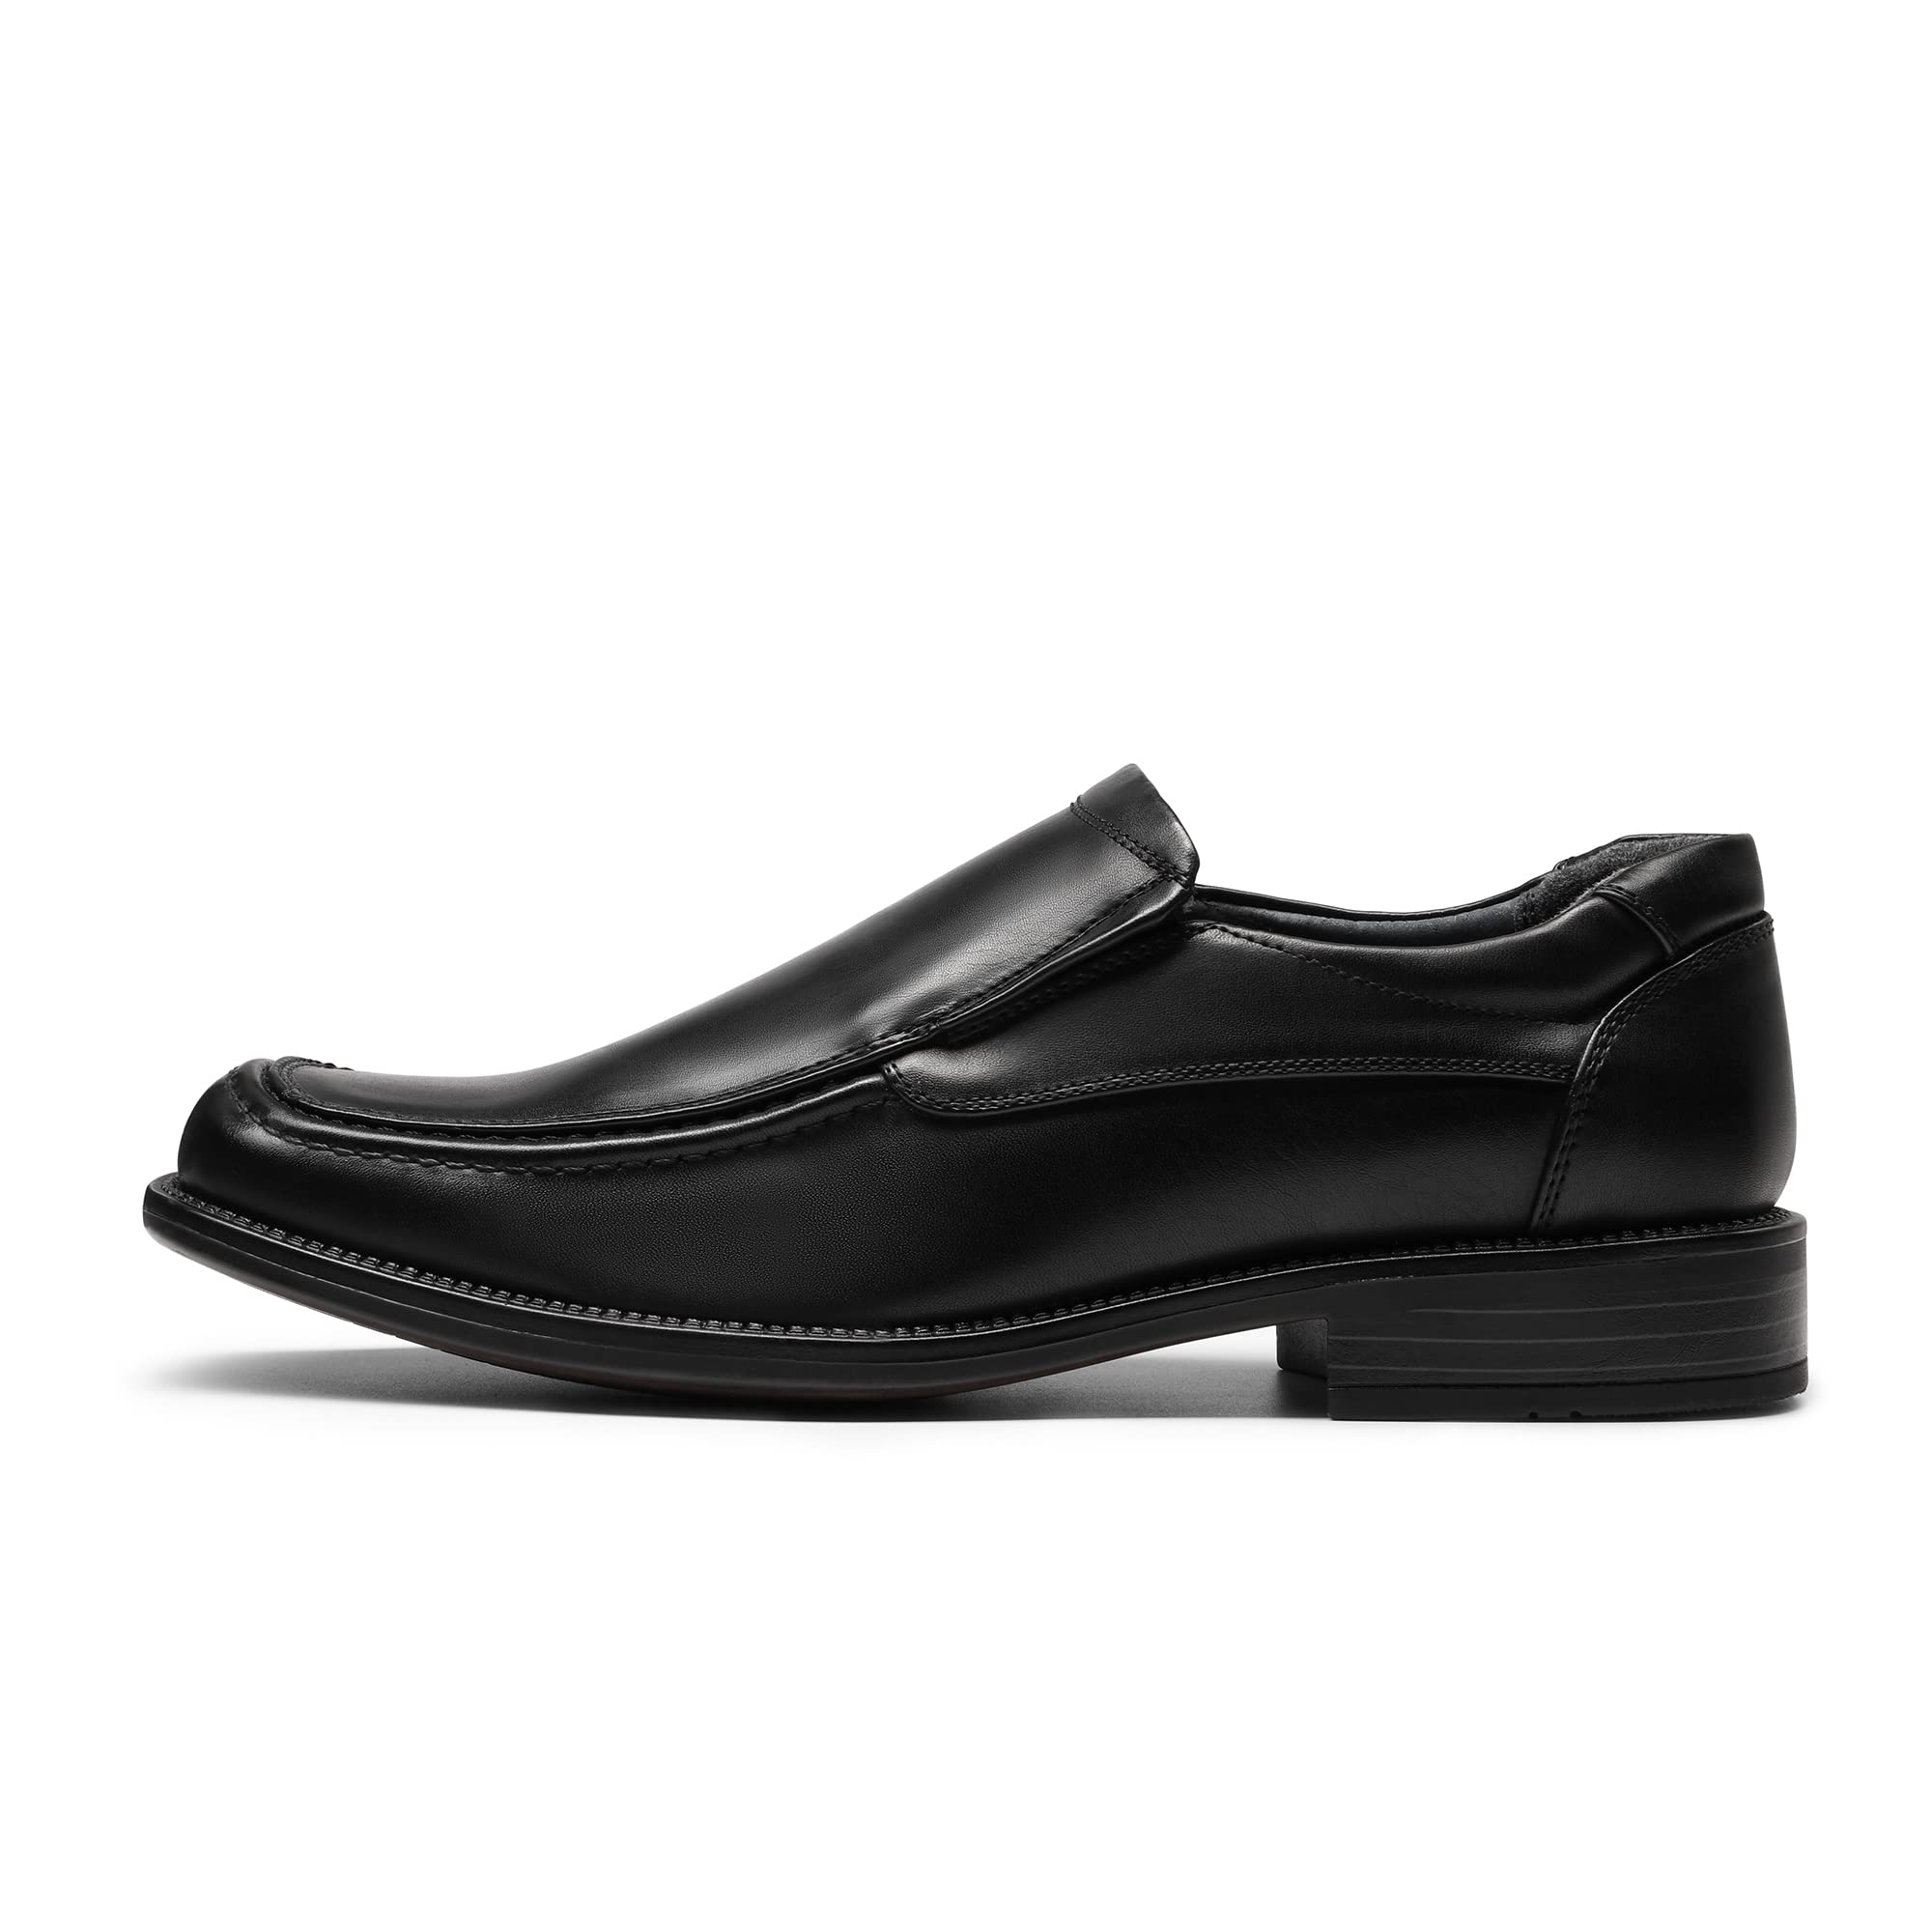 Bruno Marc Men's Goldman-02 Black Slip on Leather Lined Square Toe Dress Loafers Shoes for Casual Weekend Formal Work - 13 M US